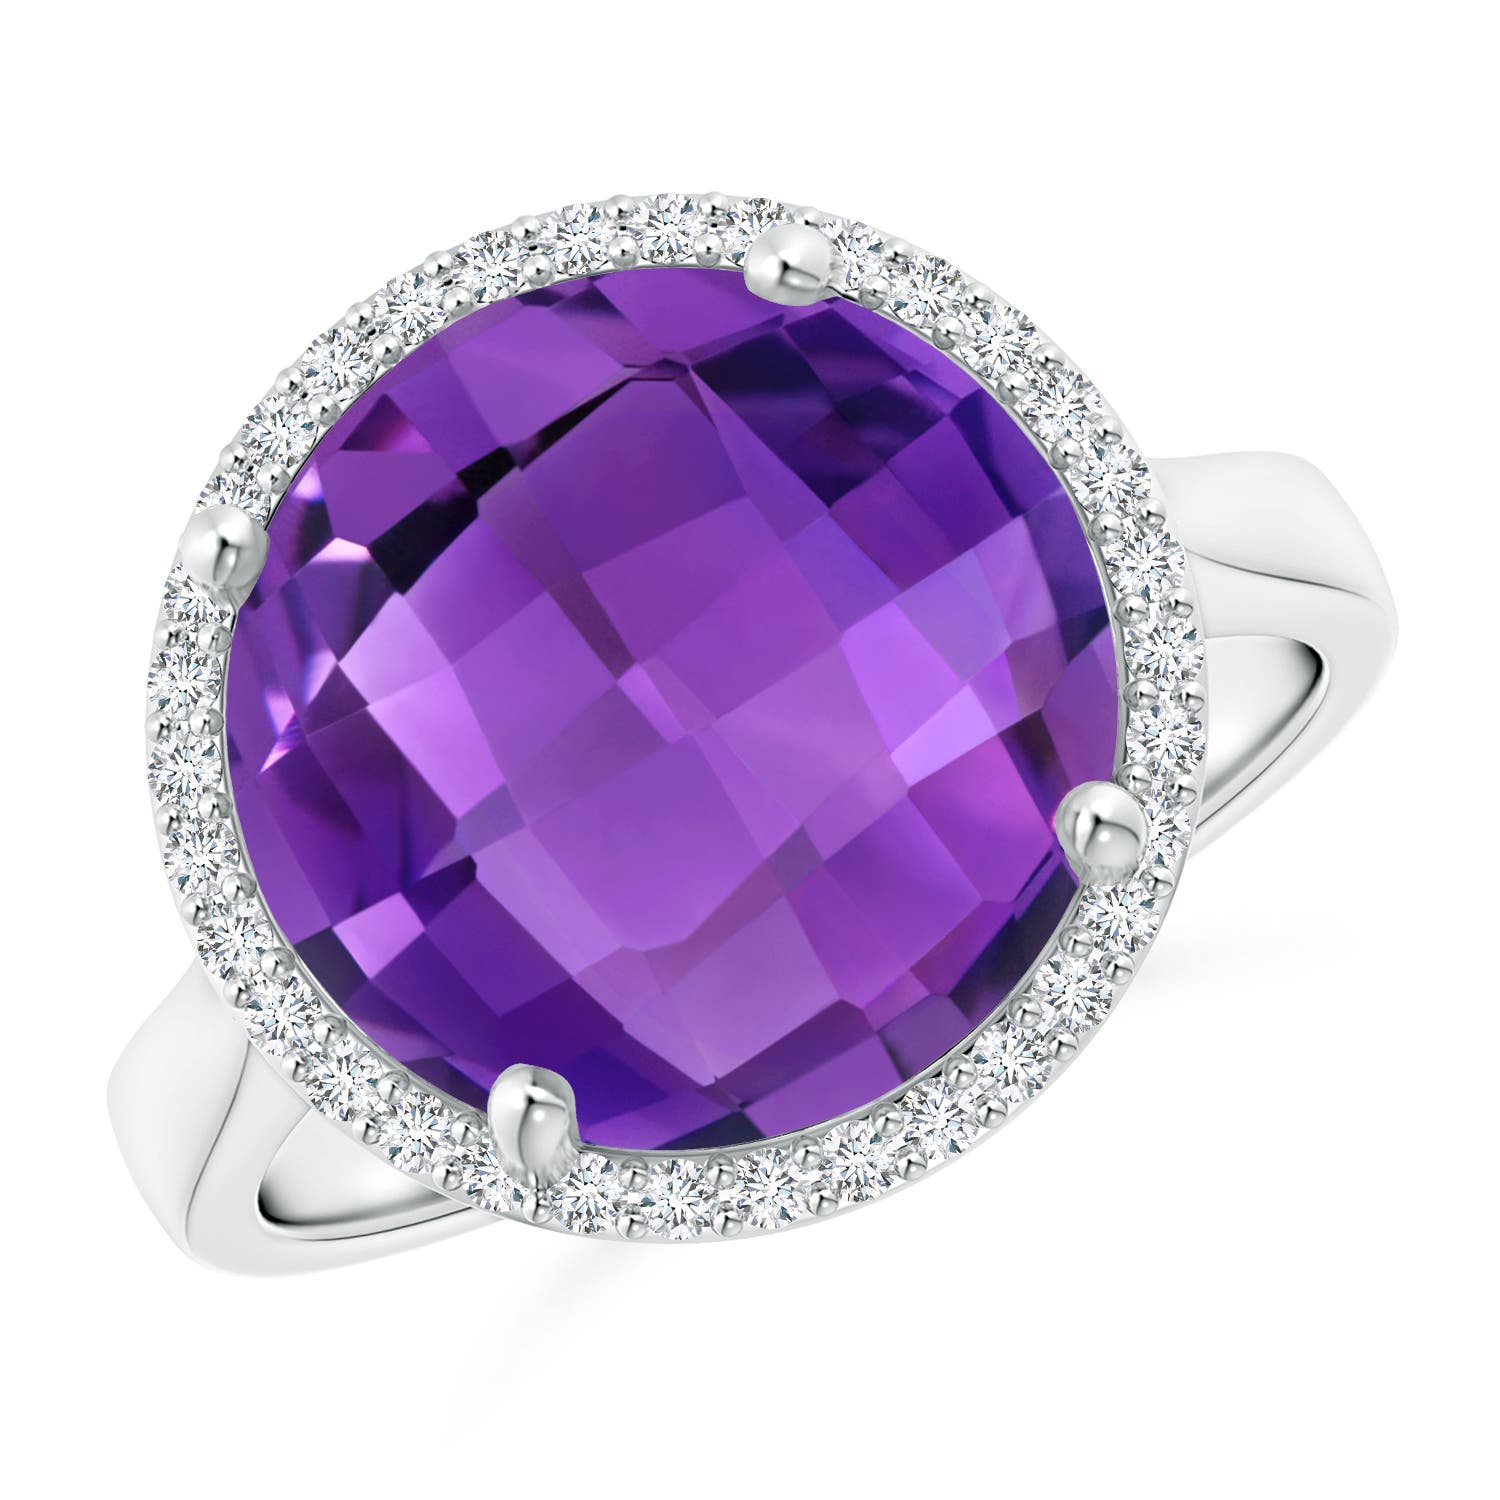 AAA - Amethyst / 5.7 CT / 14 KT White Gold